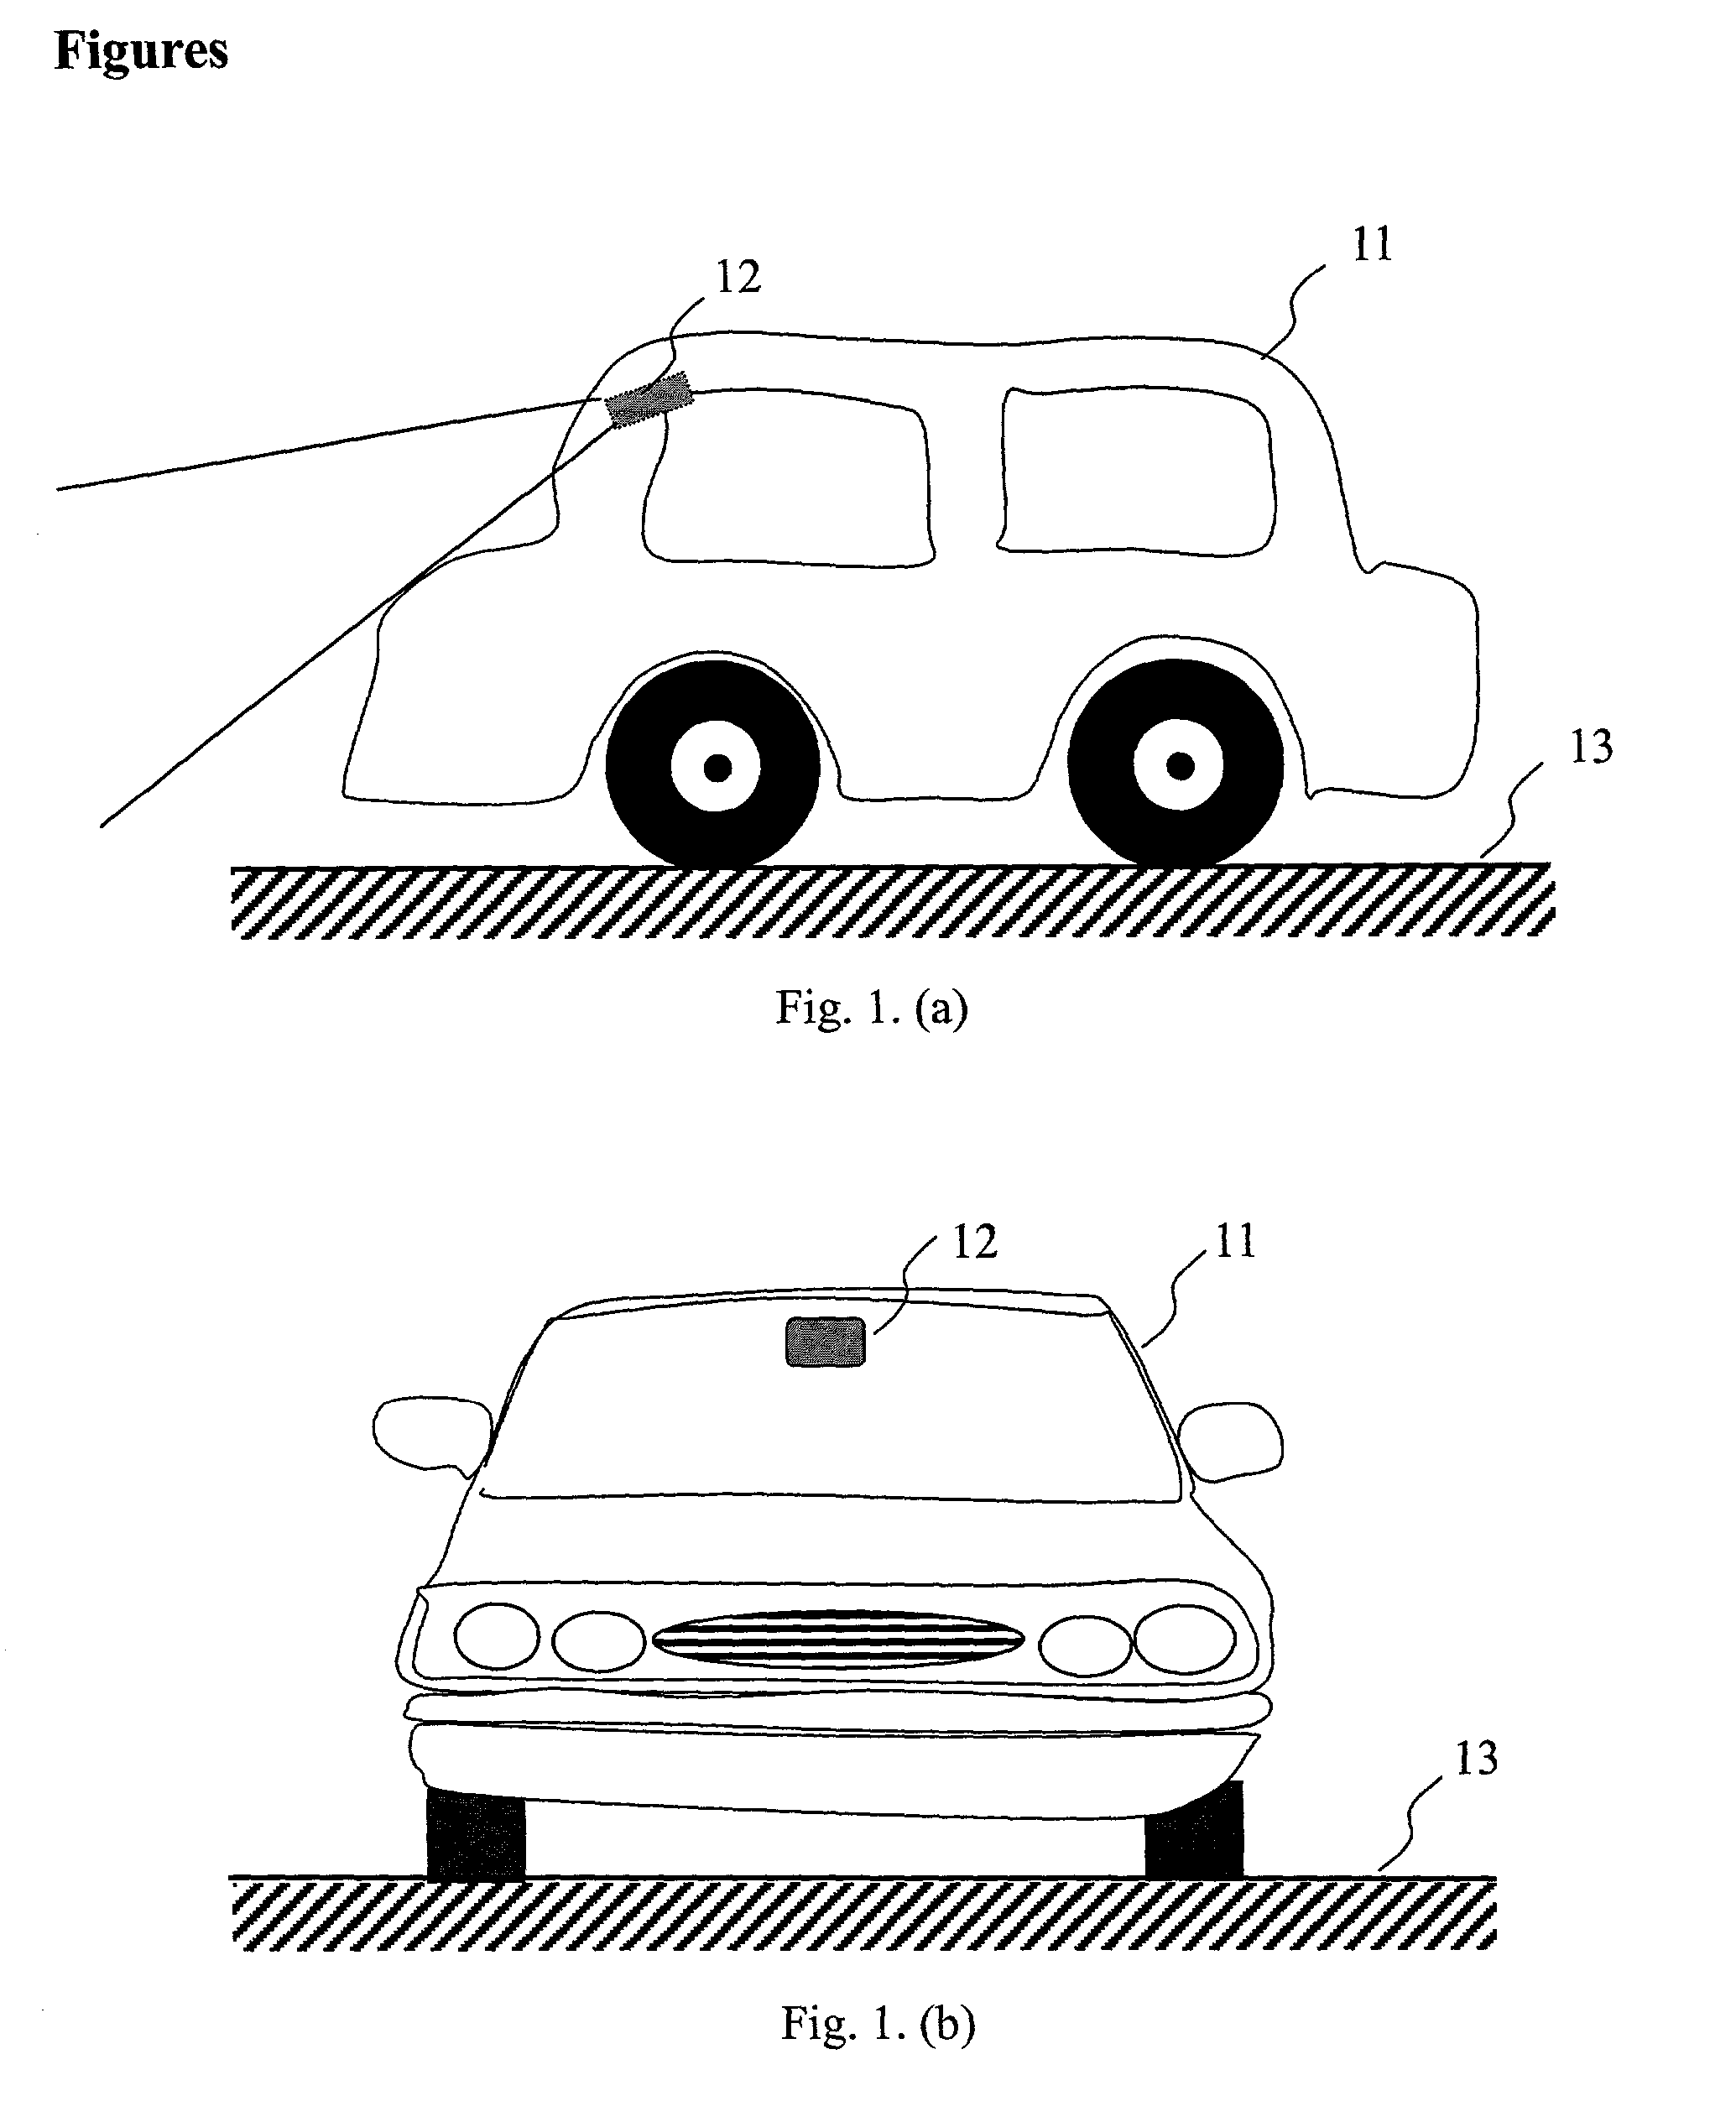 Monocular computer vision aided road vehicle driving for safety